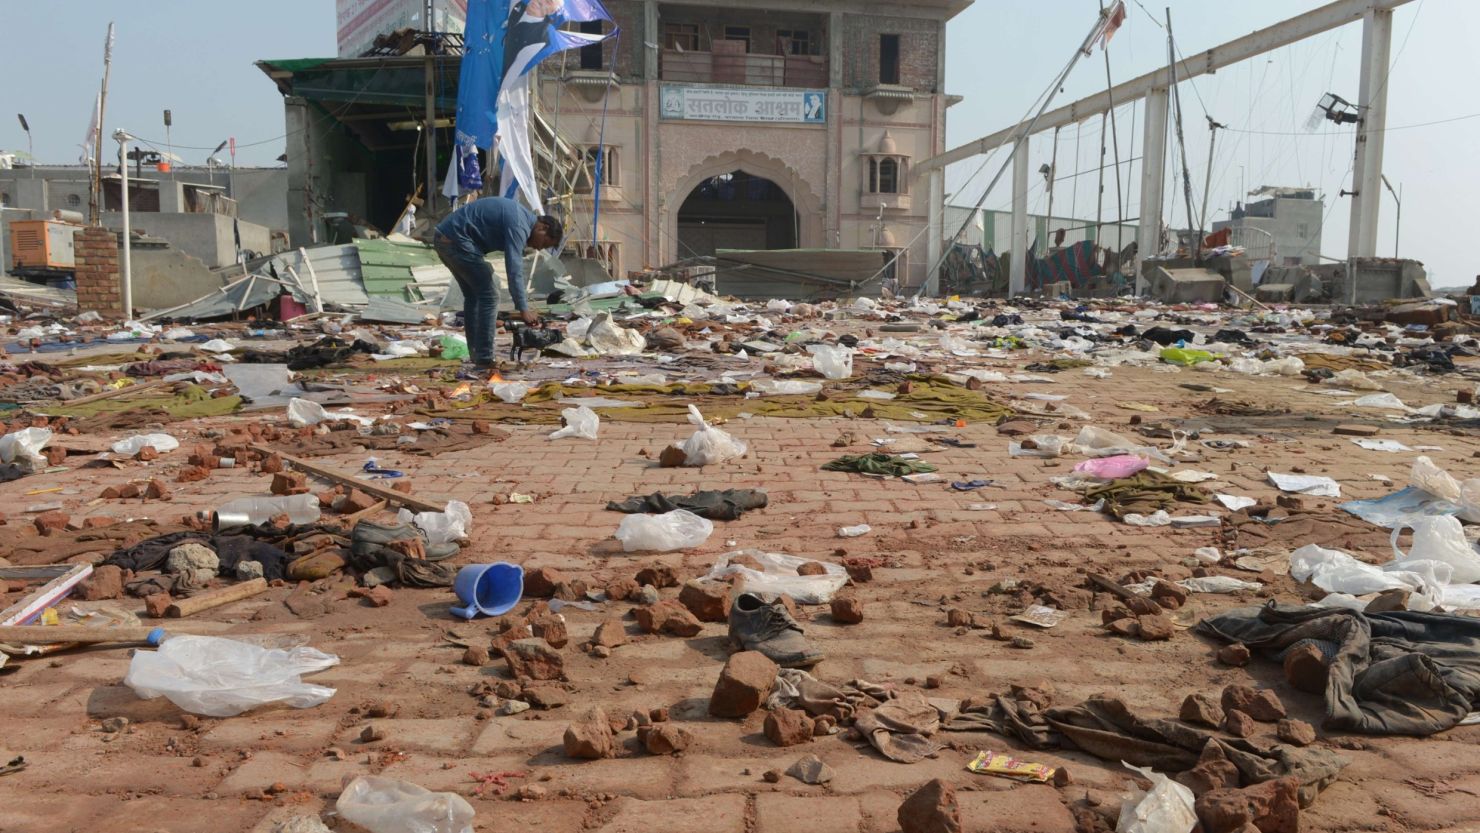 Debris is strewn around Rampal Maharaj's ashram. Police clashed with the guru's supporters as they tried to arrest him. 